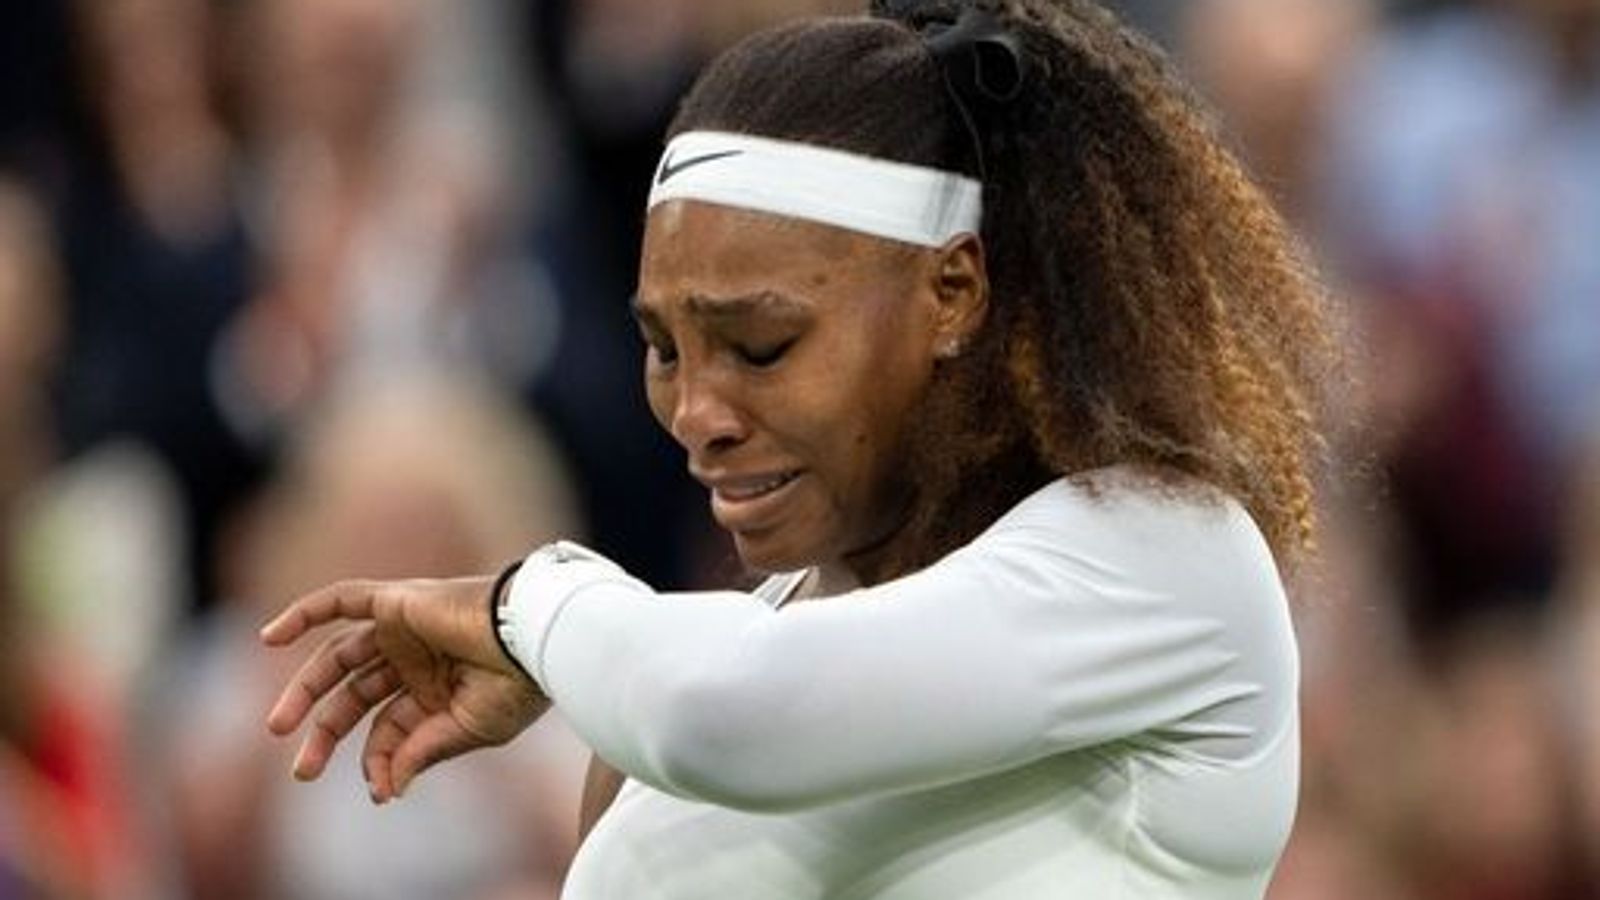 Wimbledon Coco Gauff could not watch Serena Williams emotional retirement due to injury Tennis News Sky Sports